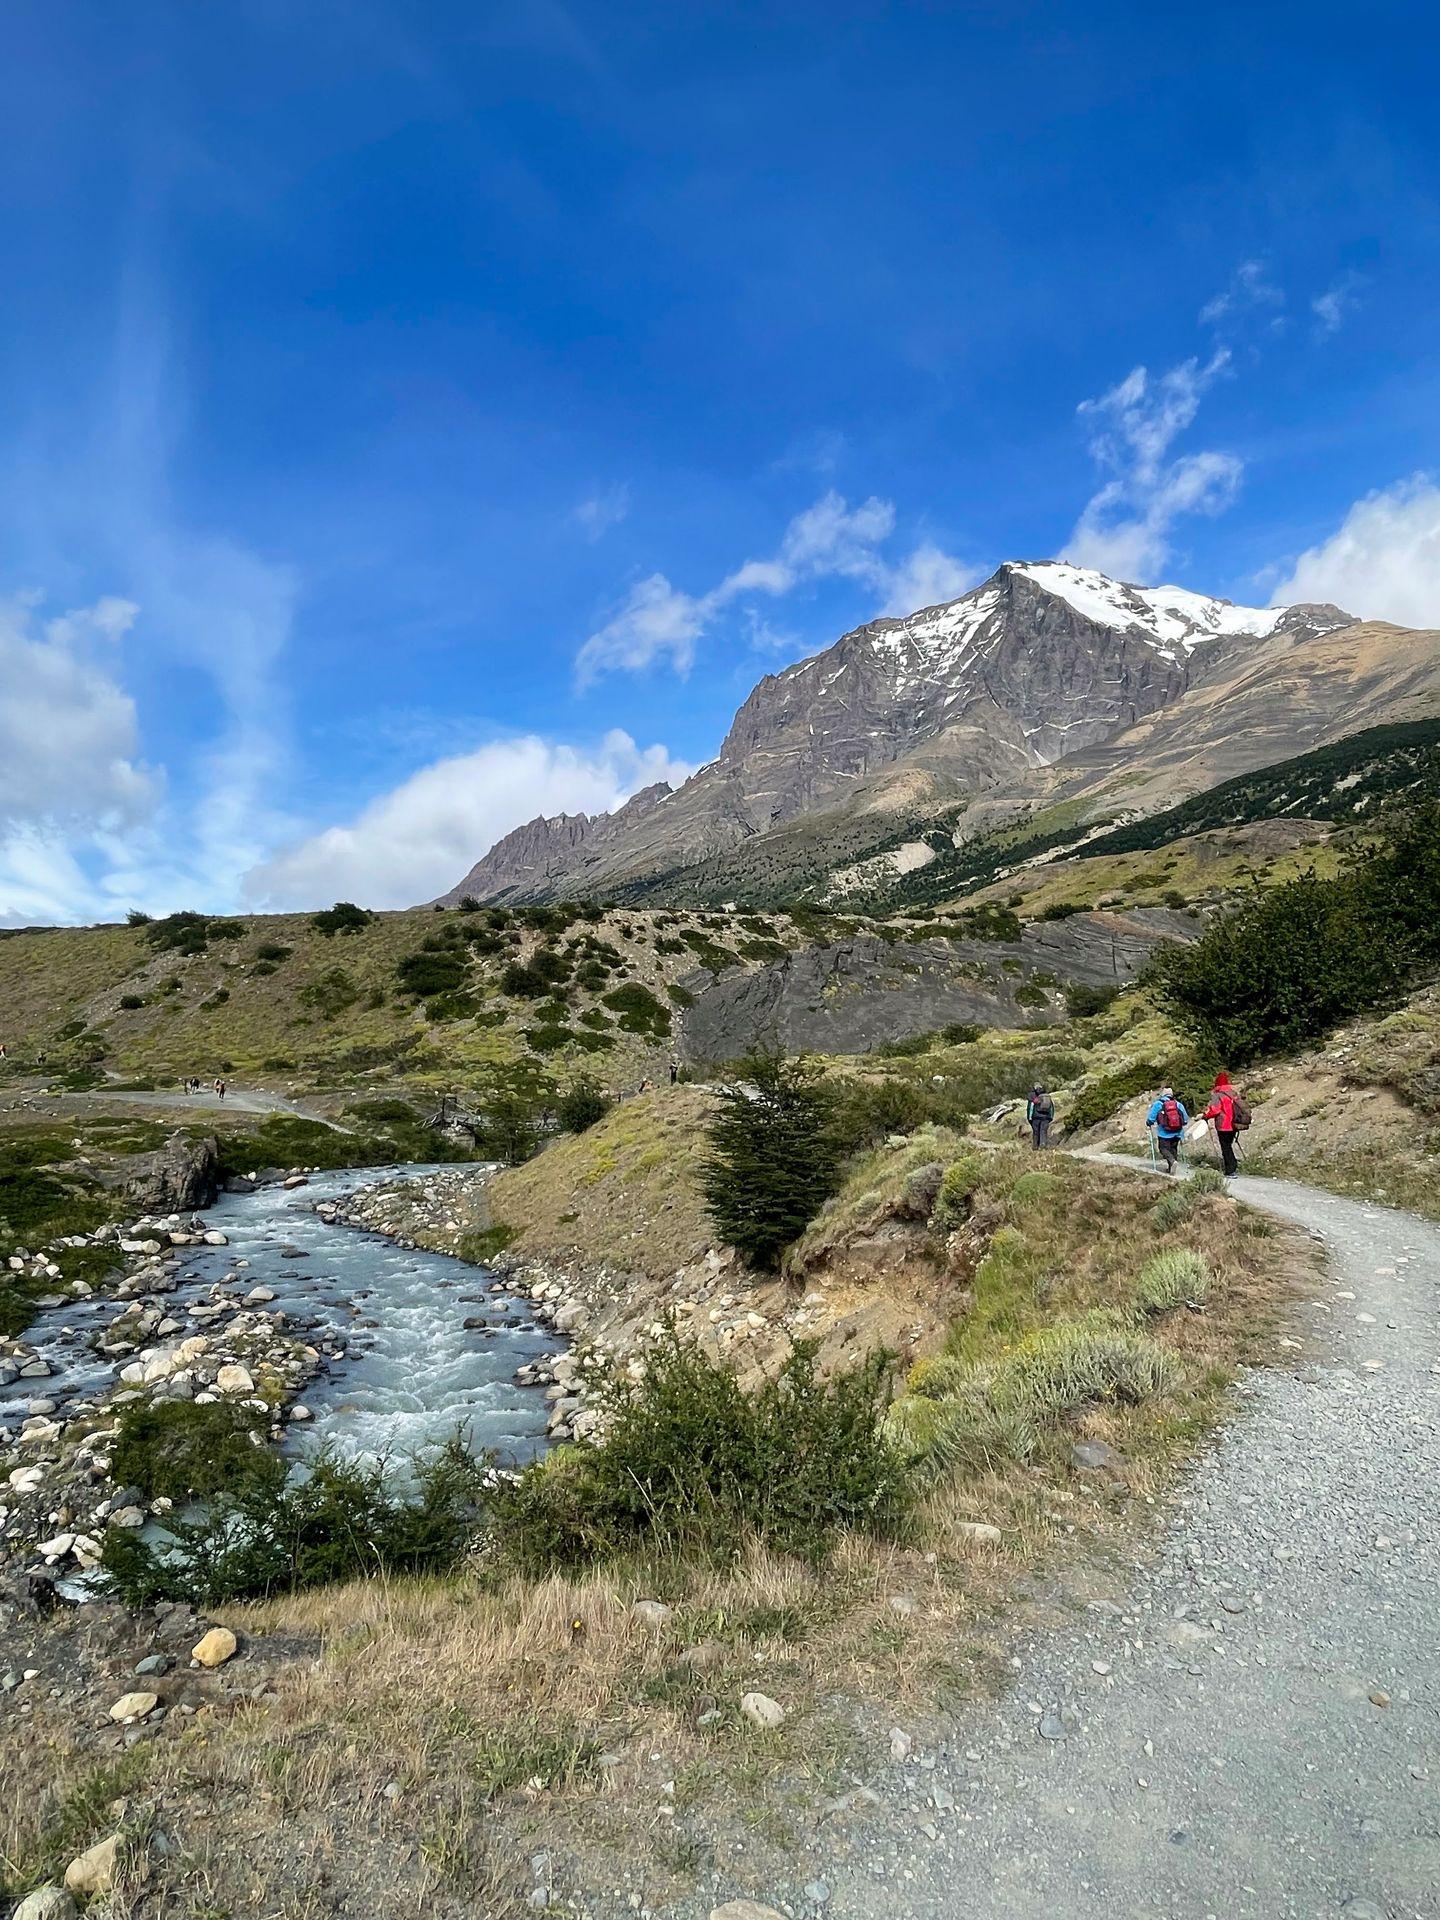 A flat trail next to a curving river with a mountain in the background.